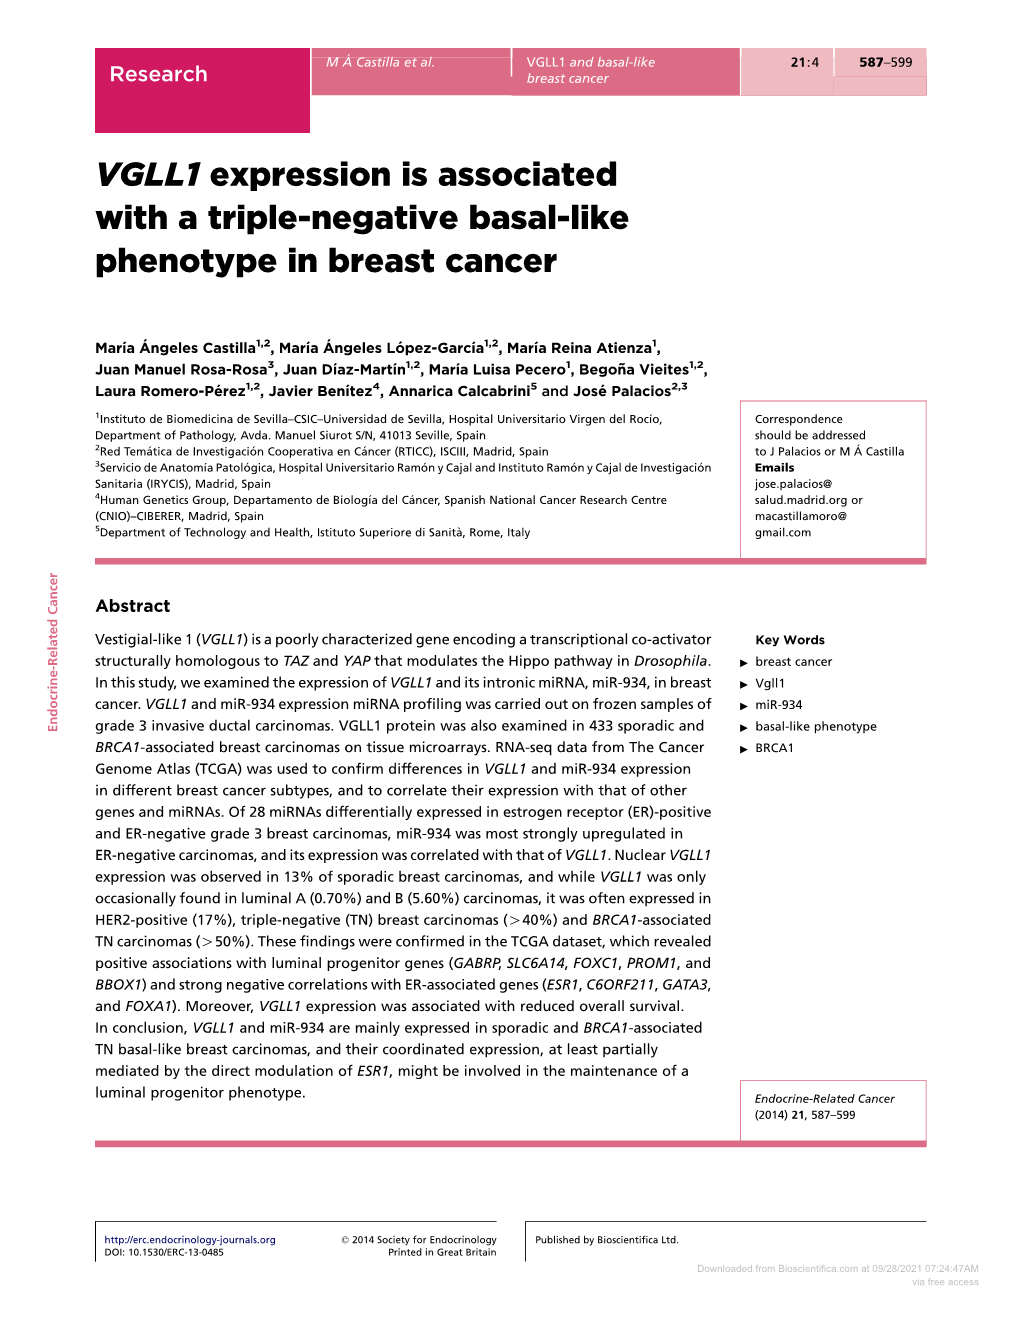 VGLL1 Expression Is Associated with a Triple-Negative Basal-Like Phenotype in Breast Cancer